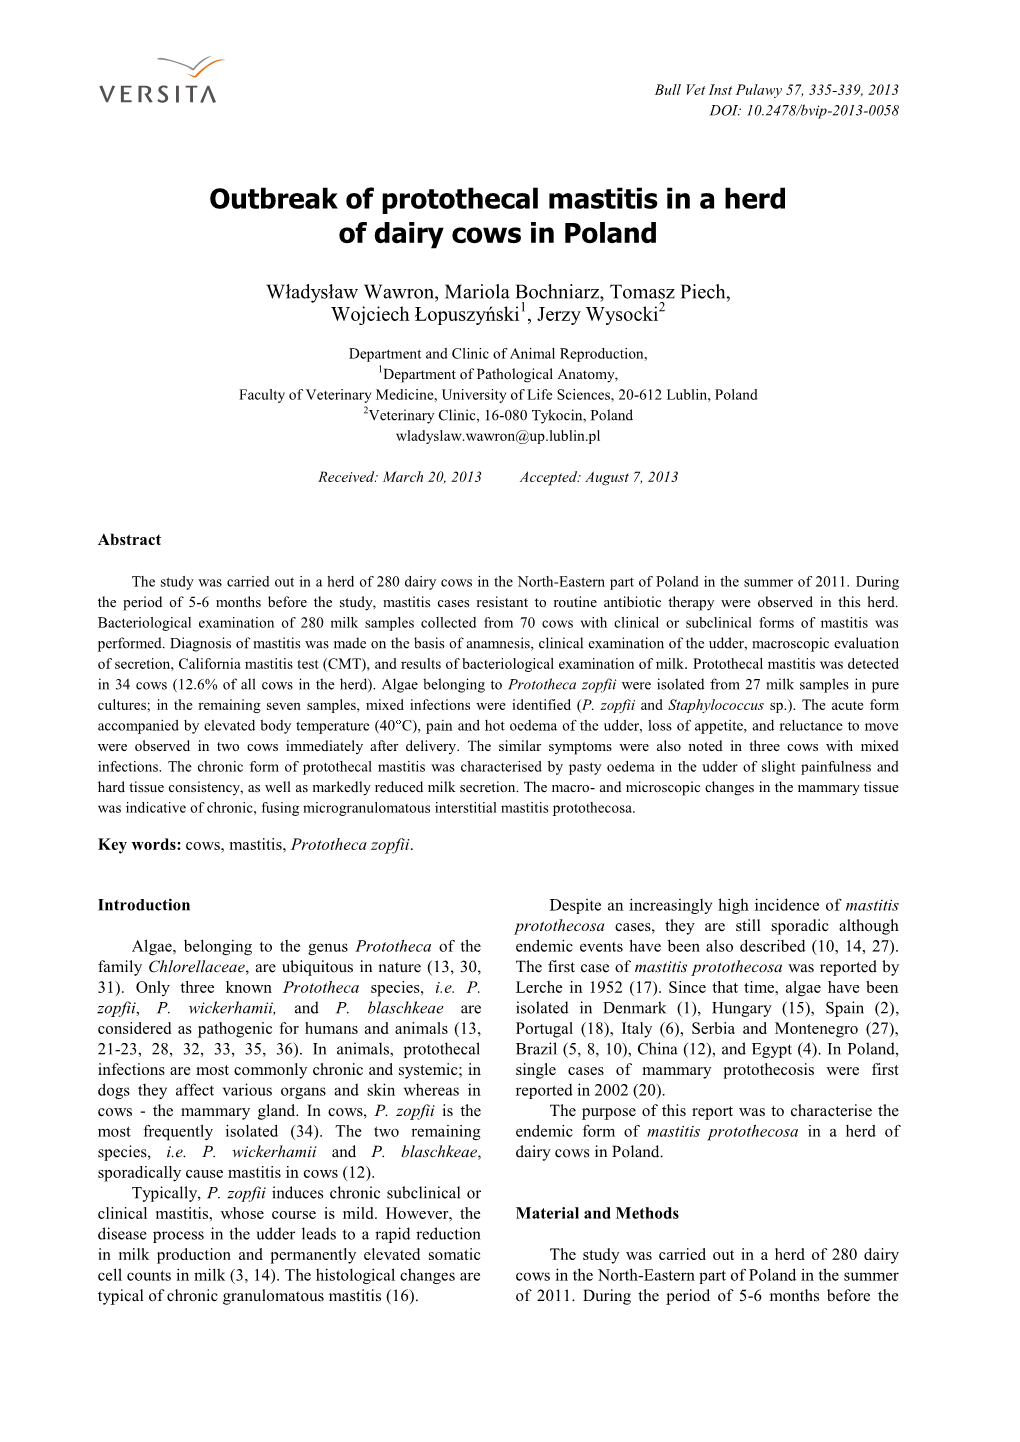 Outbreak of Protothecal Mastitis in a Herd of Dairy Cows in Poland